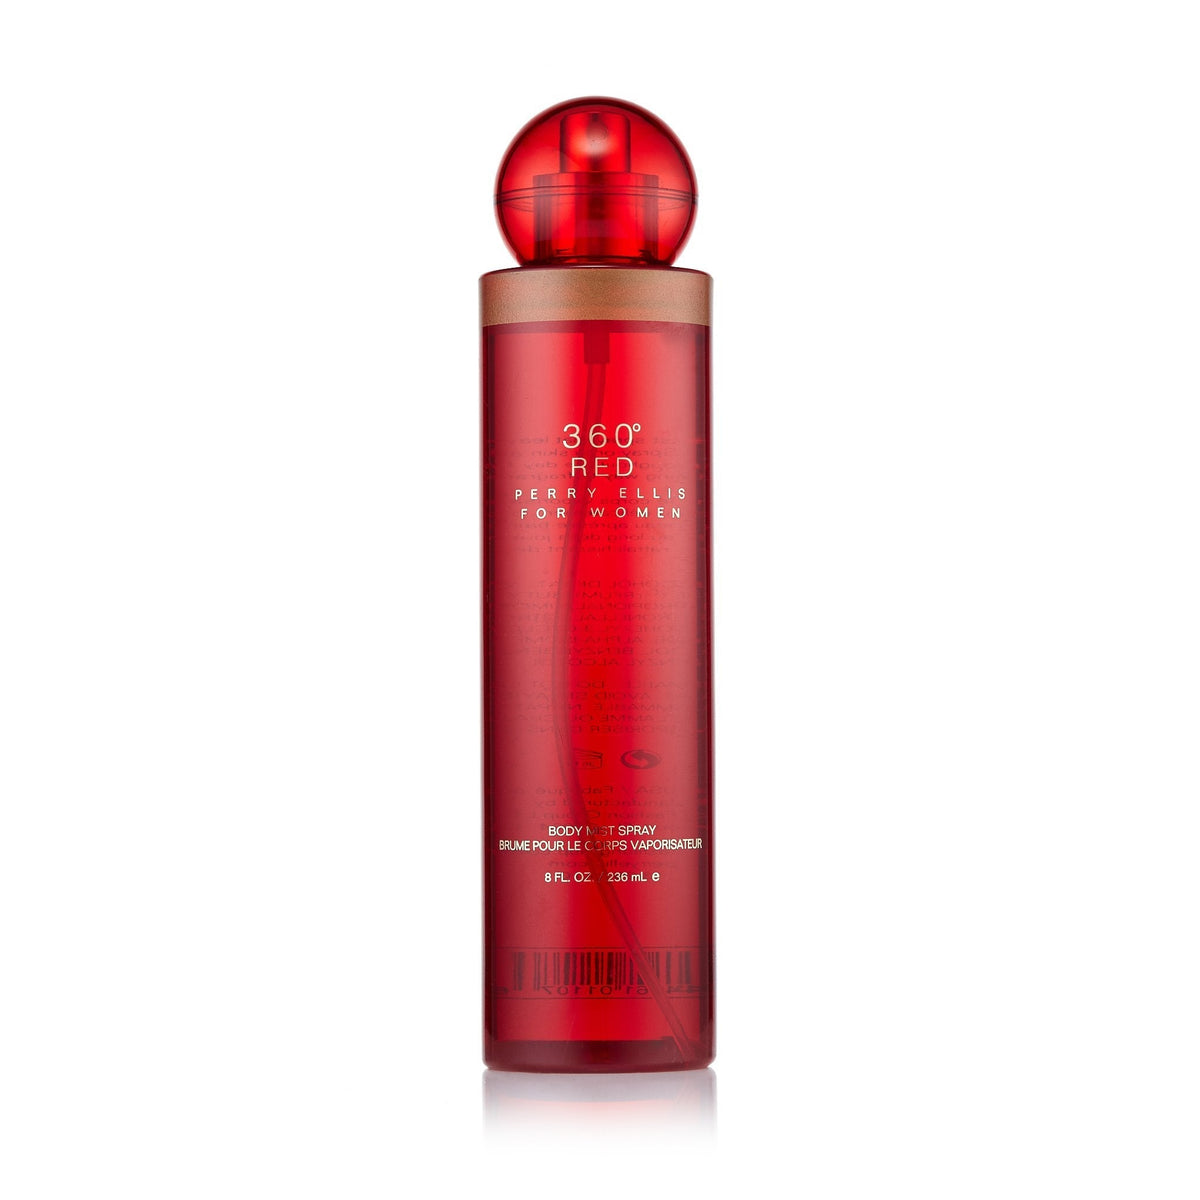 360° Red Body Spray for Women by Perry Ellis 8.0 oz.